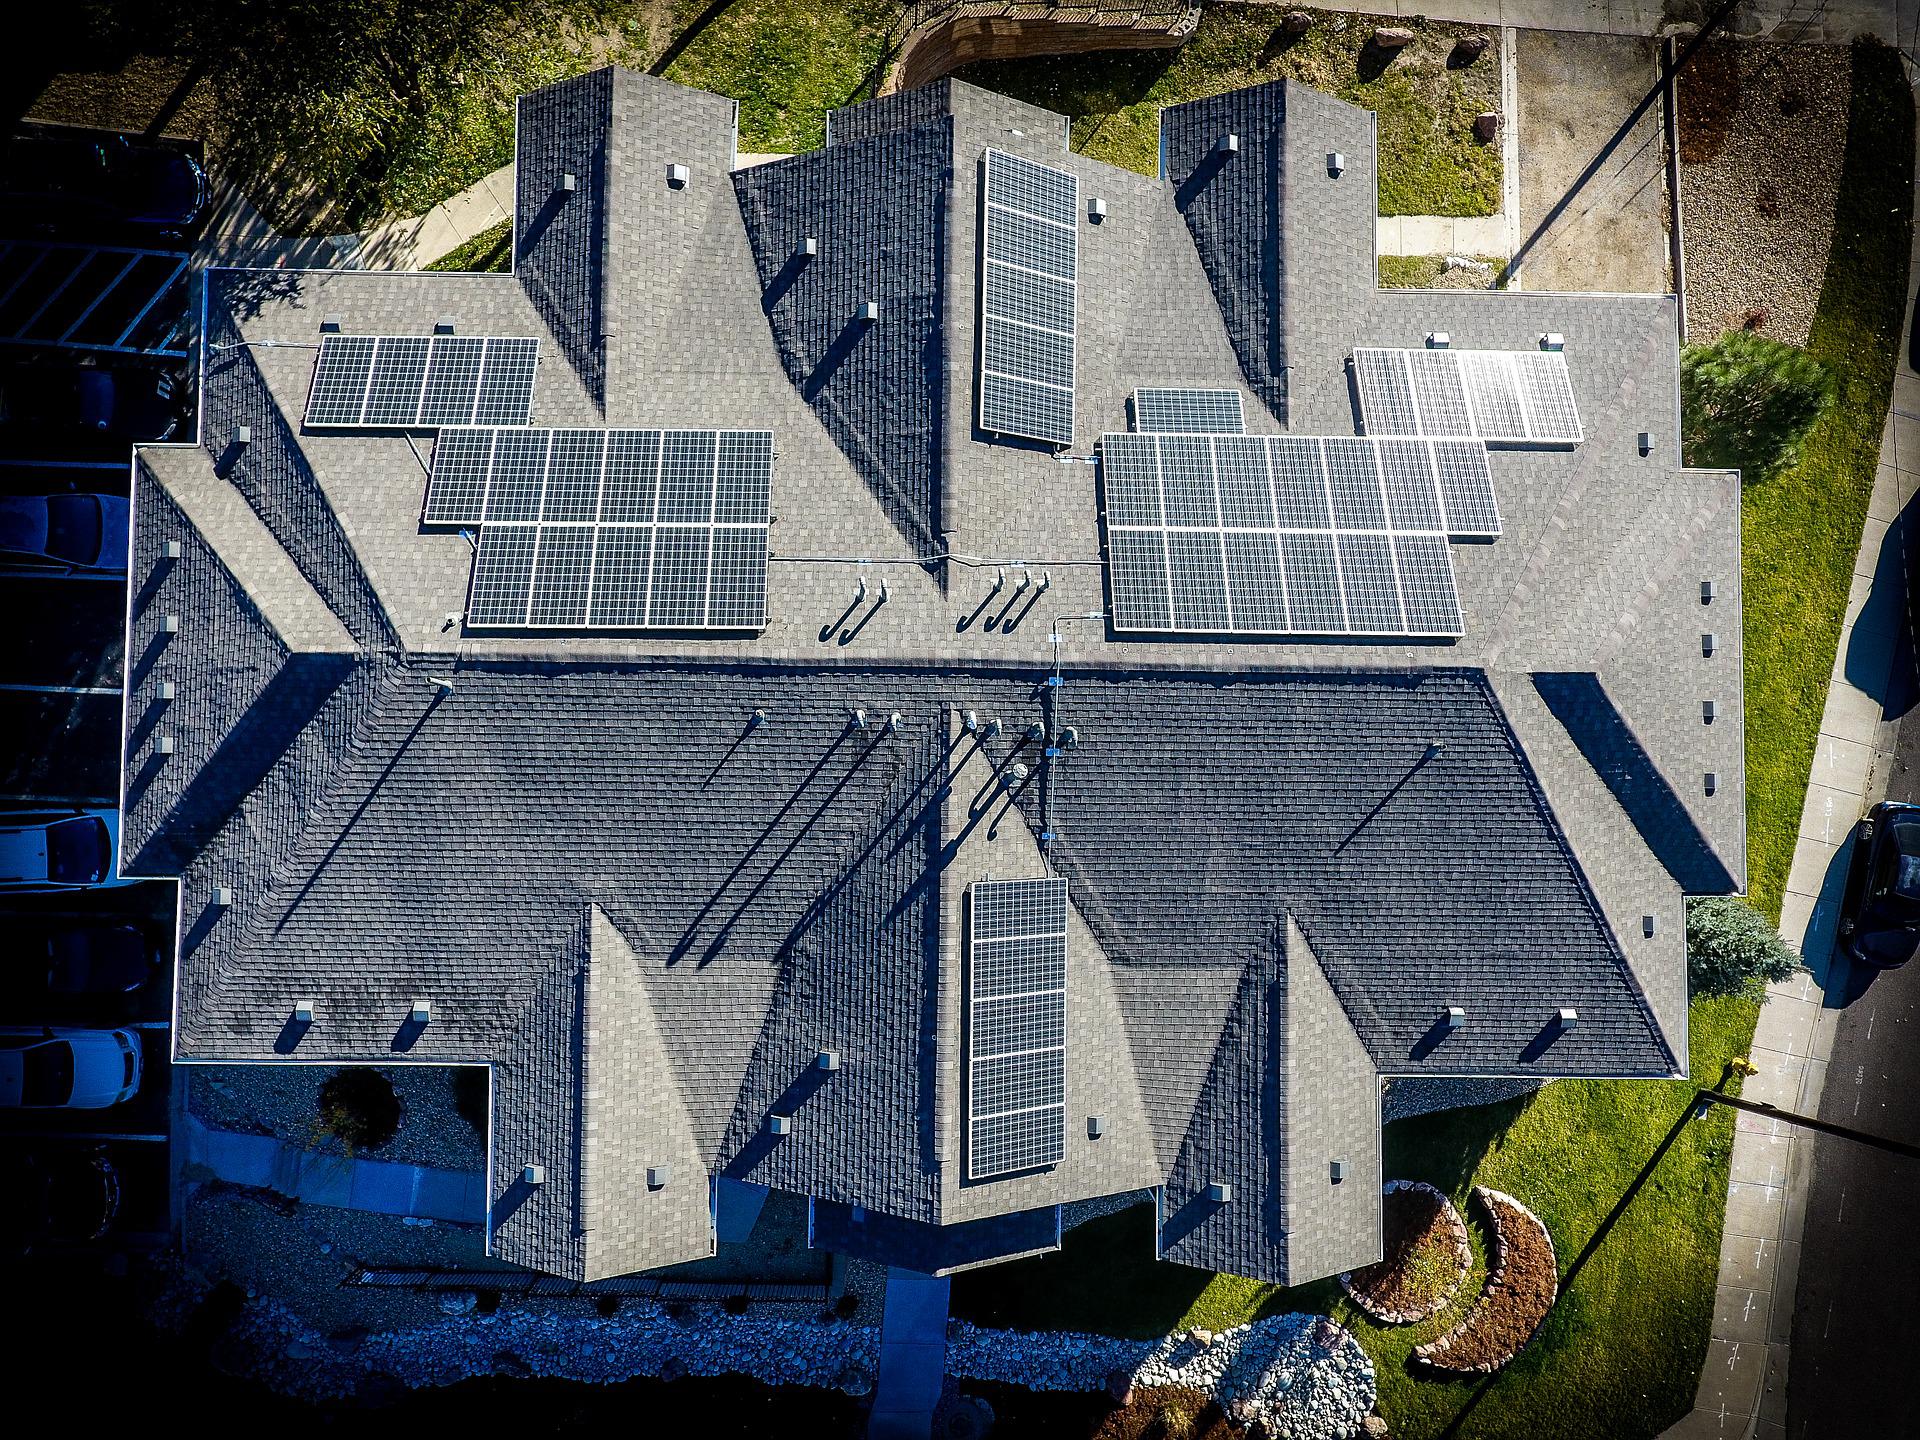 Bird's eye view of someone using community solar panels on their home.